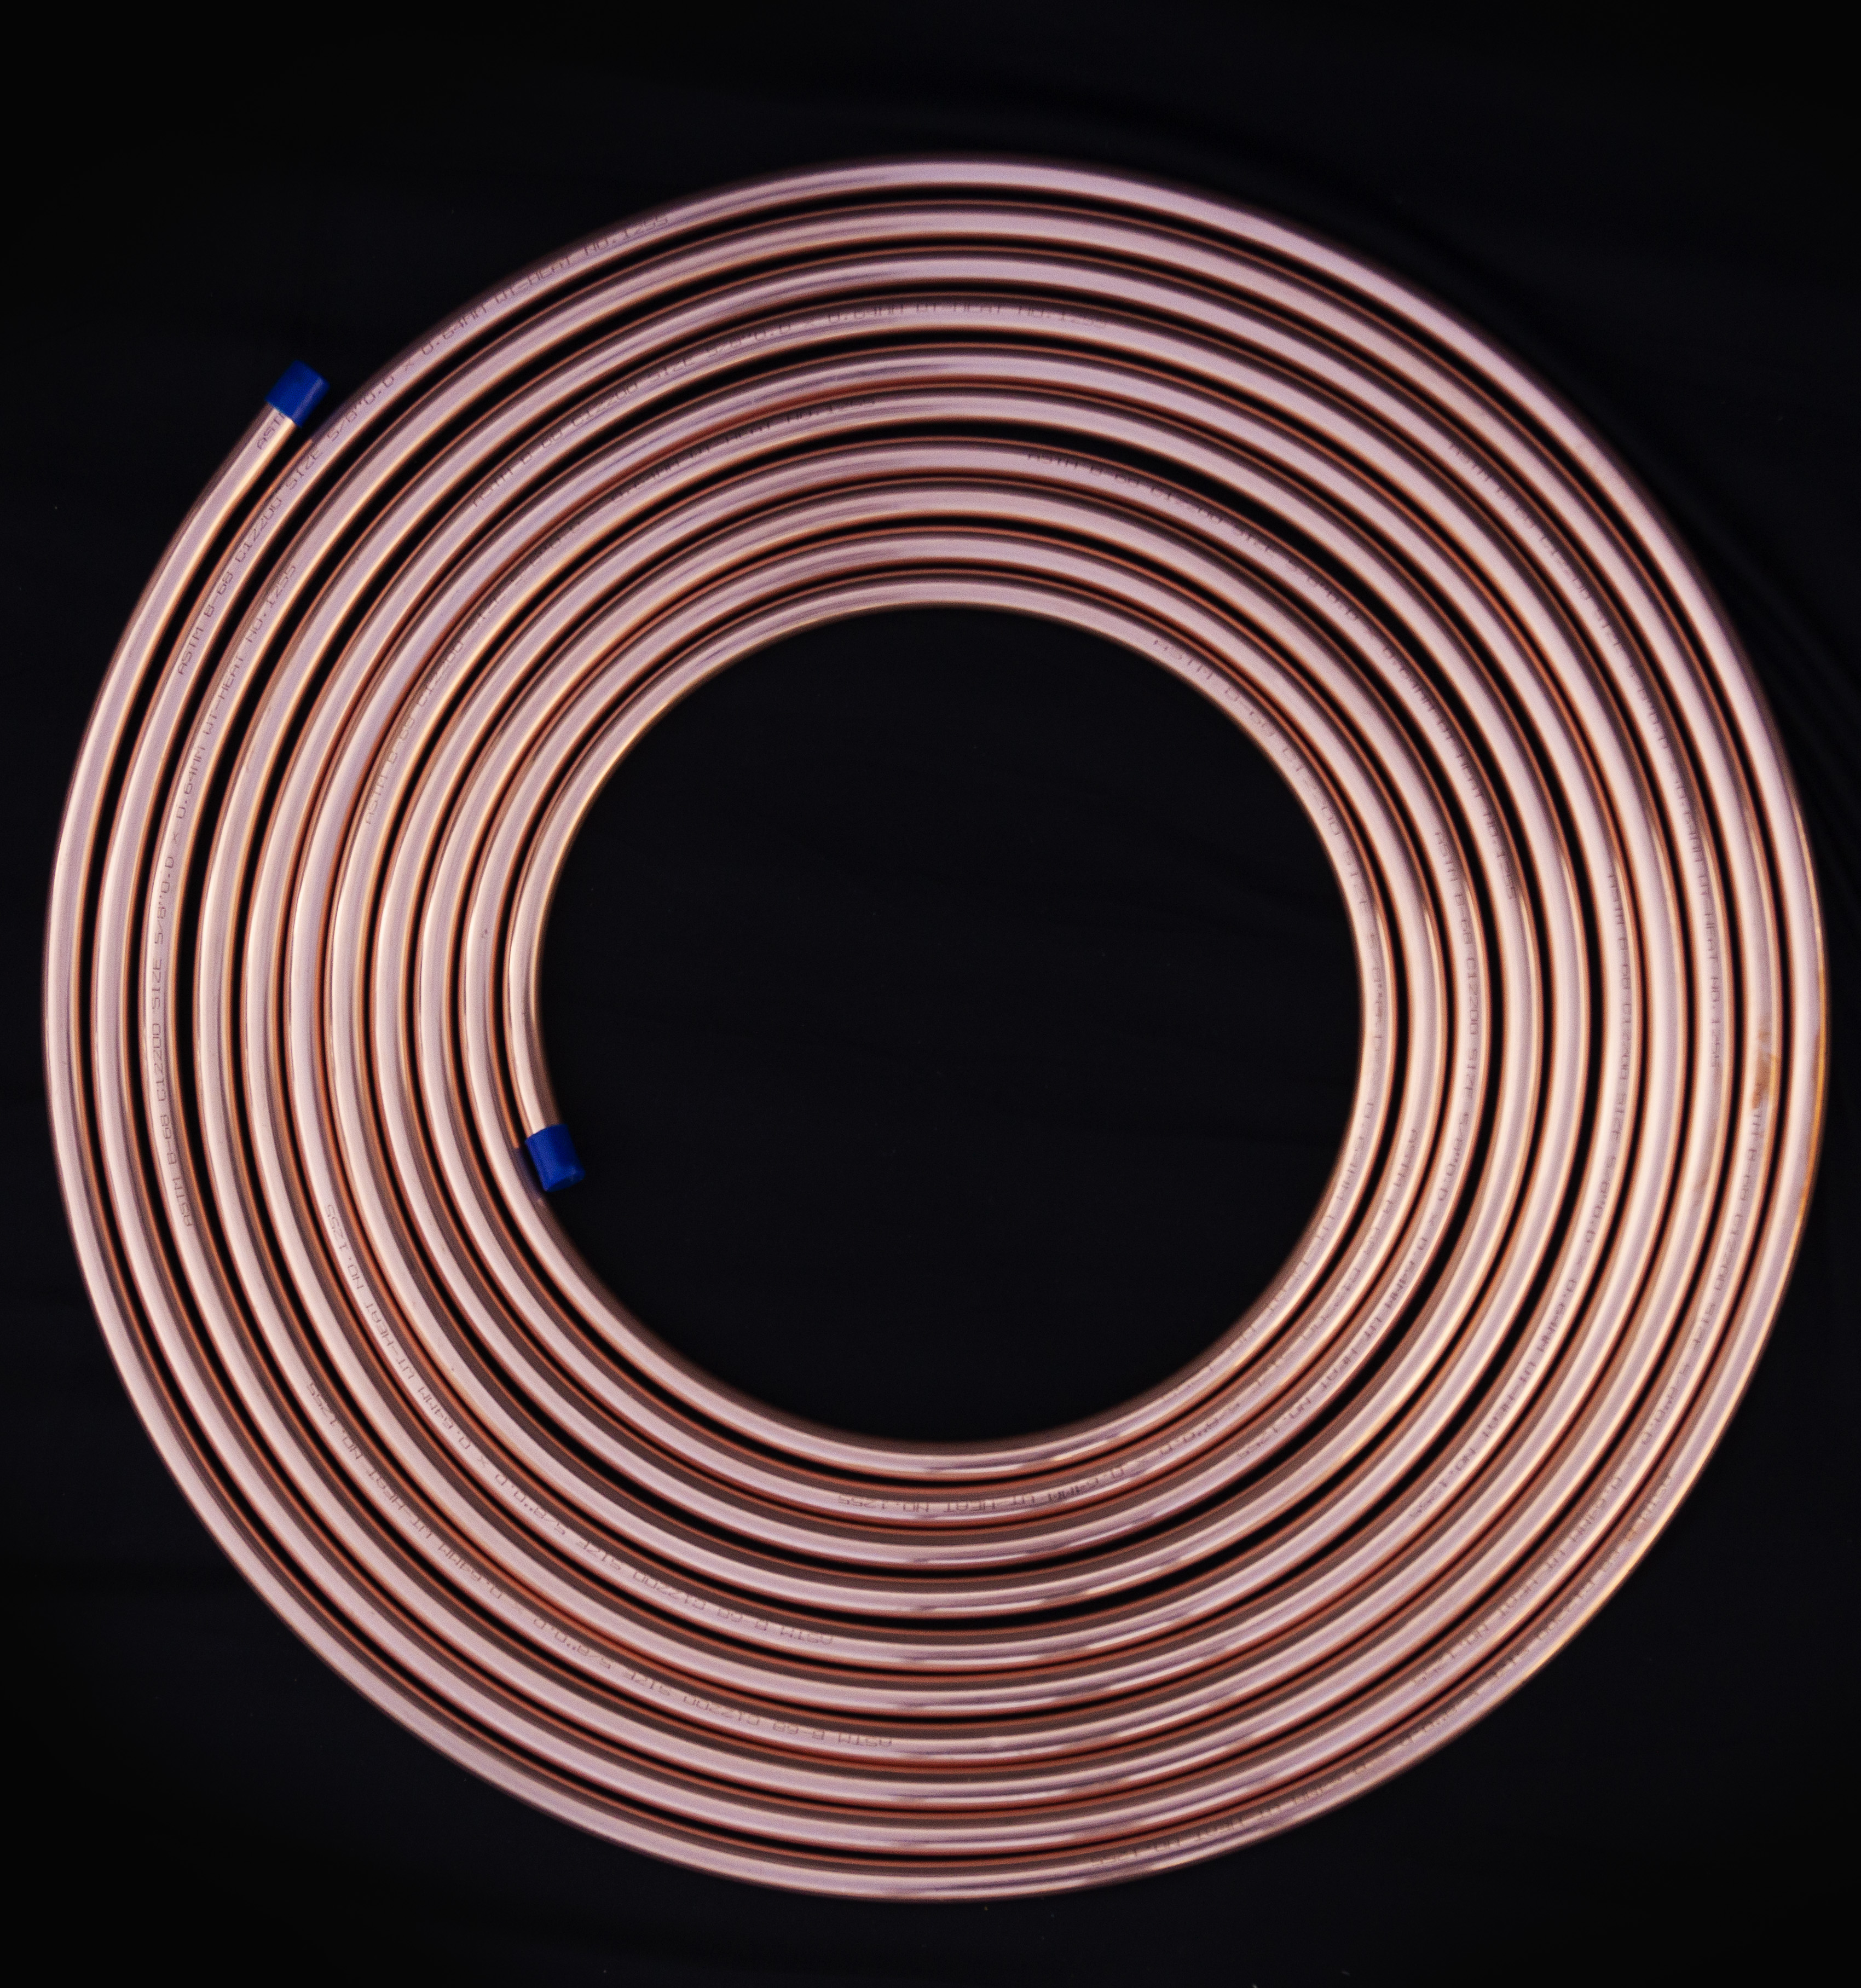 LEVEL WOUND COIL